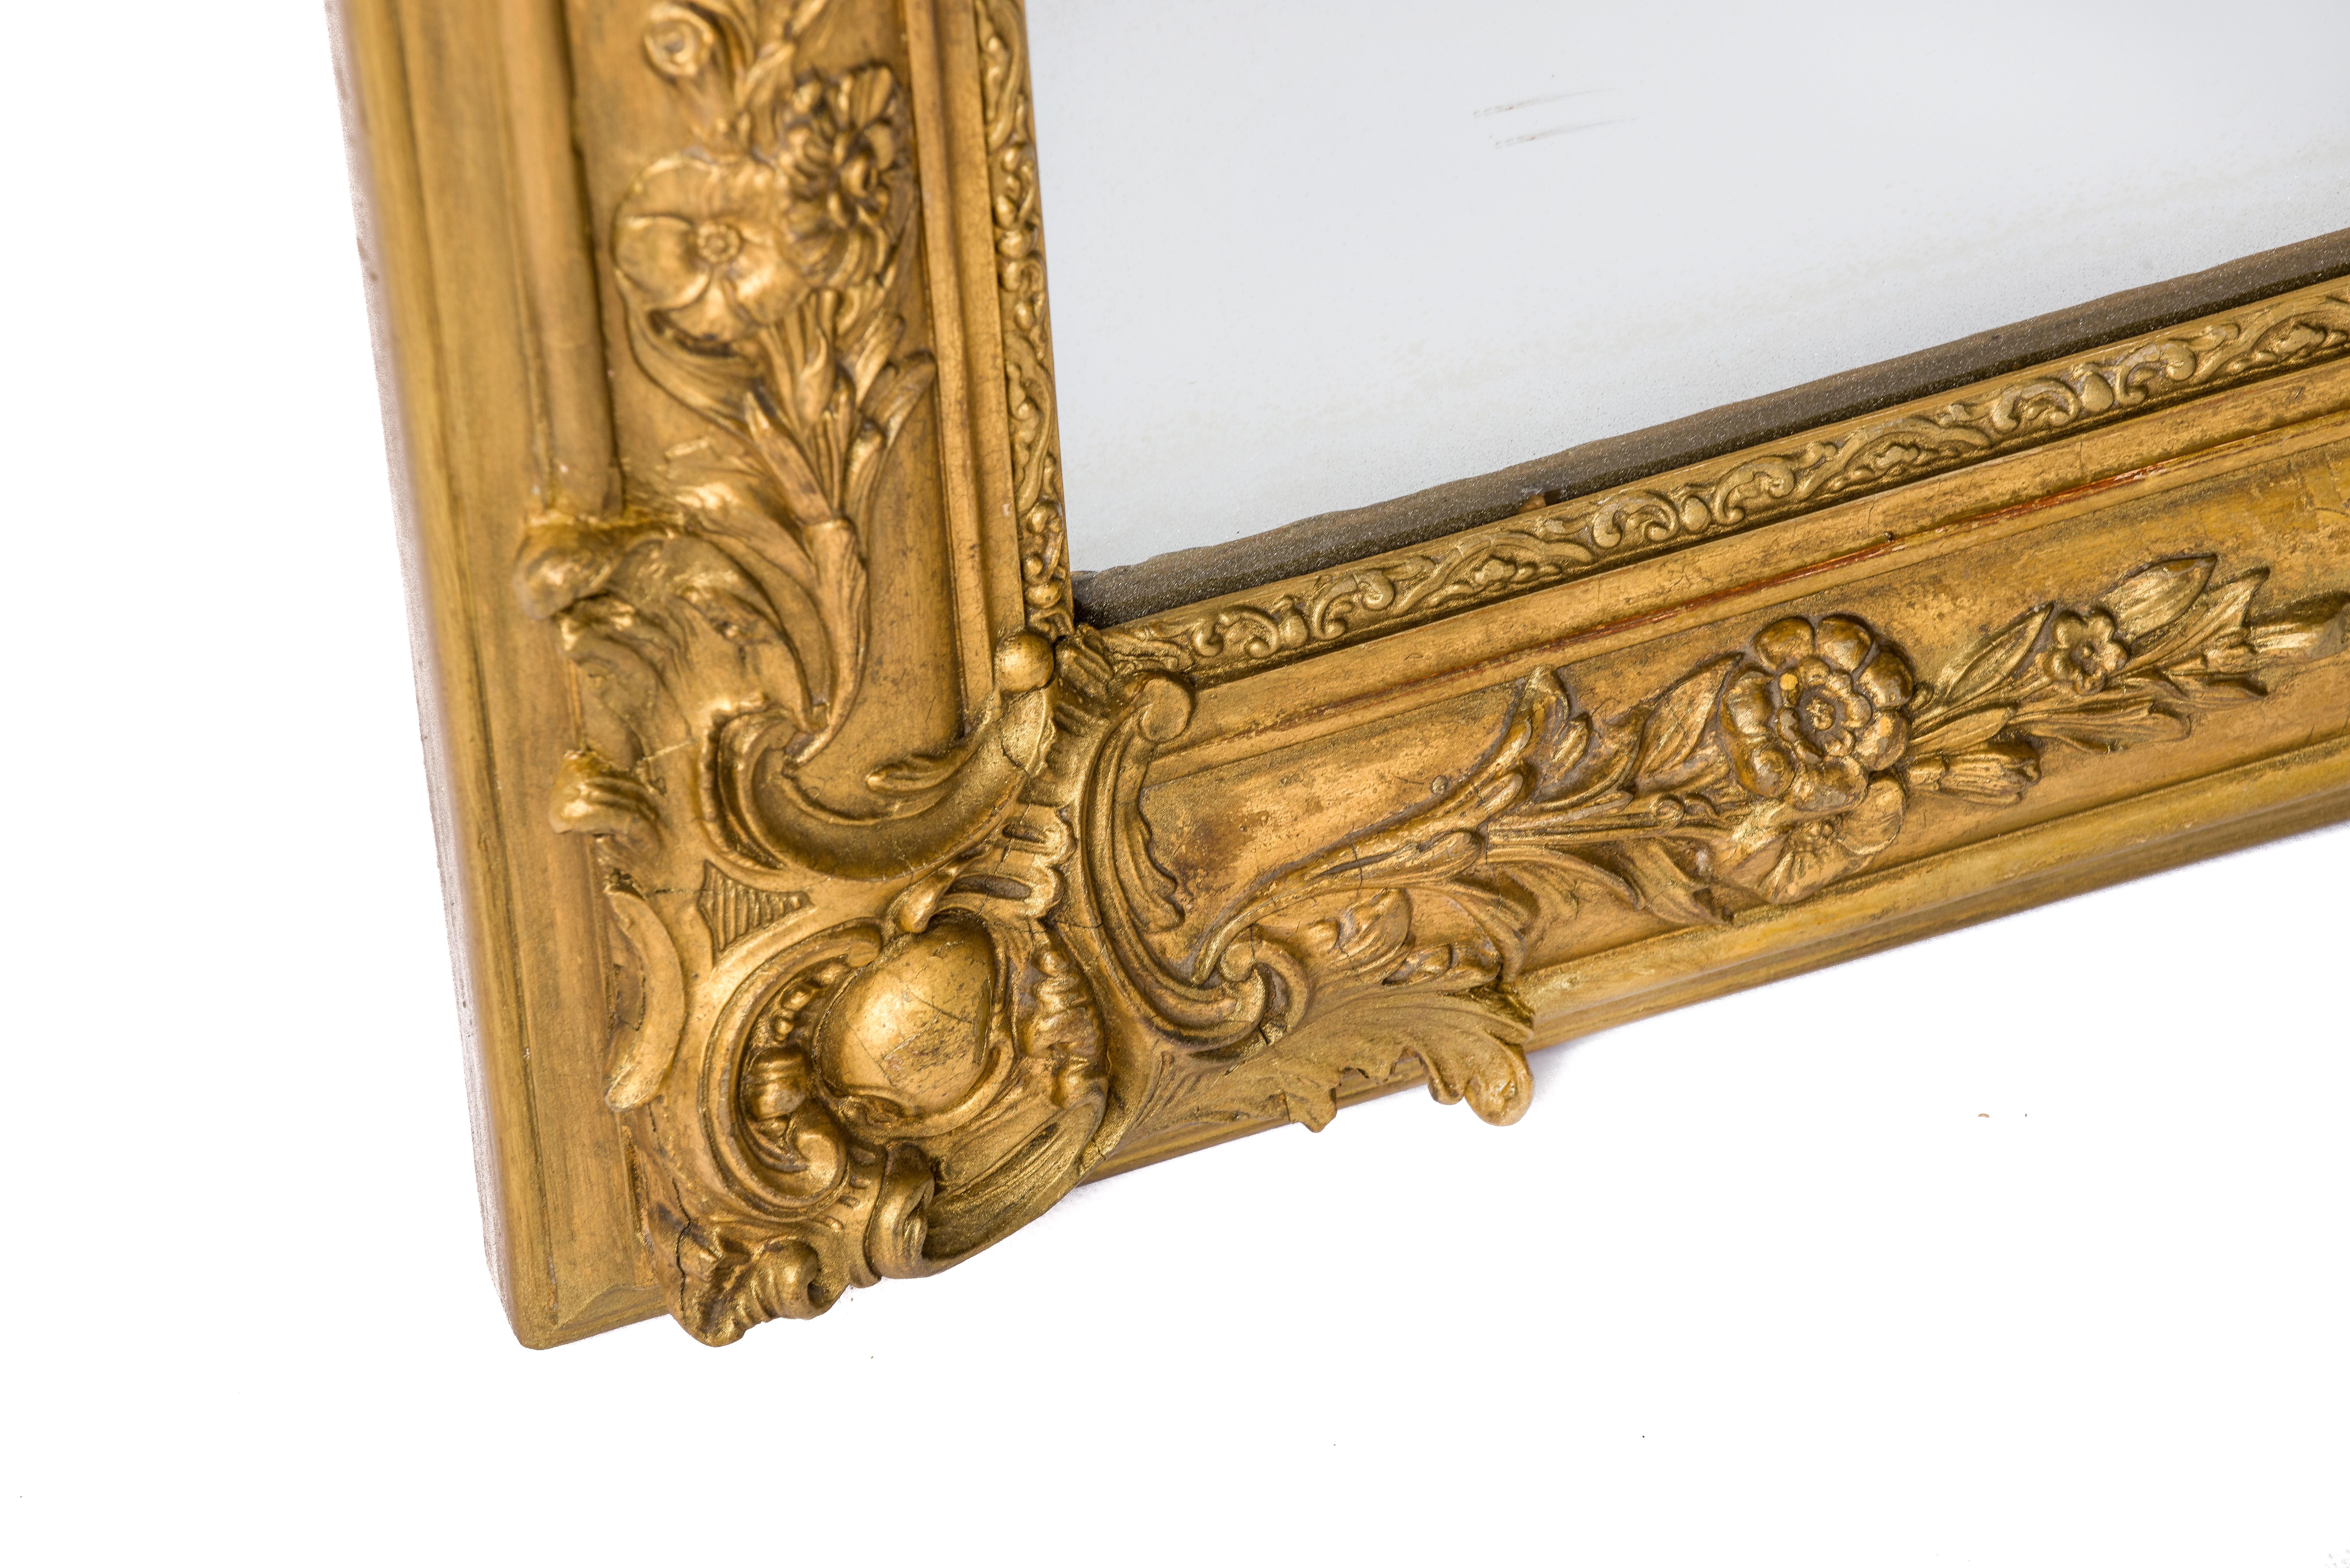 Gesso Antique 19th-Century Gold Leaf Gilt French Louis Philippe Mirror